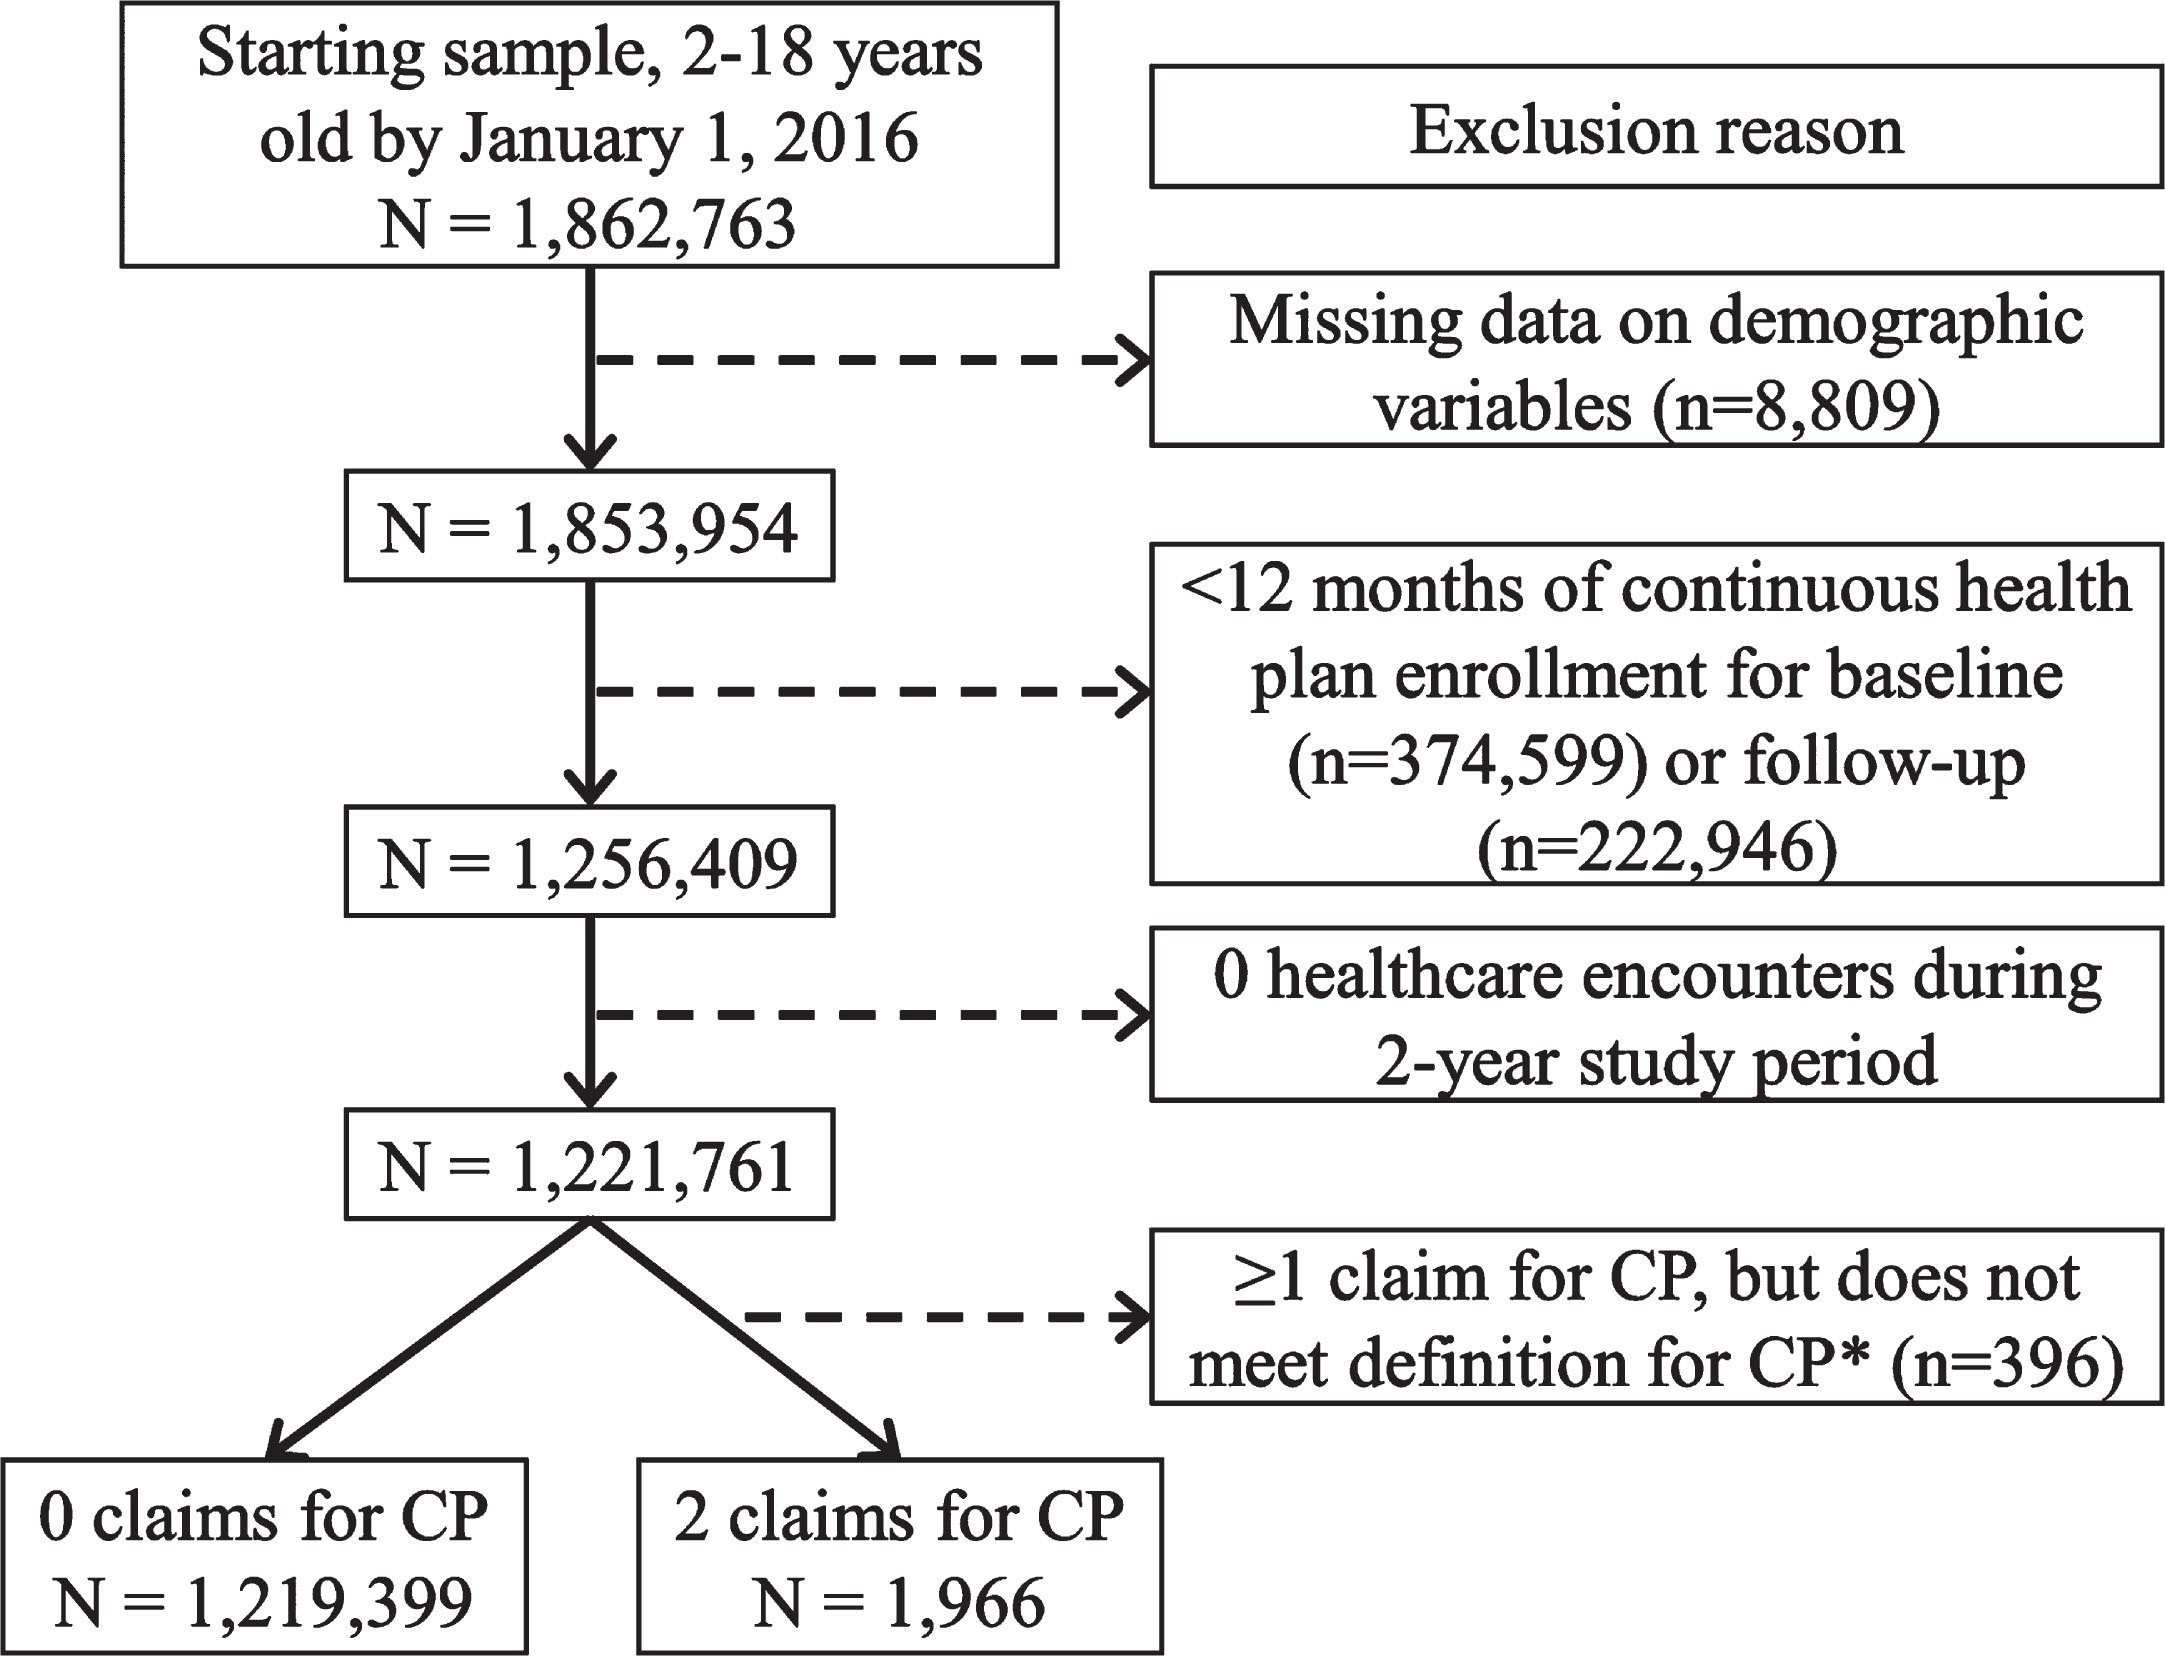 Flow chart of inclusion/exclusion criteria to obtain the analytic samples of children with and without cerebral palsy (CP). *CP was identified by ≥2 claims, where each claim was on a separate day within 12 months of one another, containing a pertinent code for CP at any point during the two-year period.